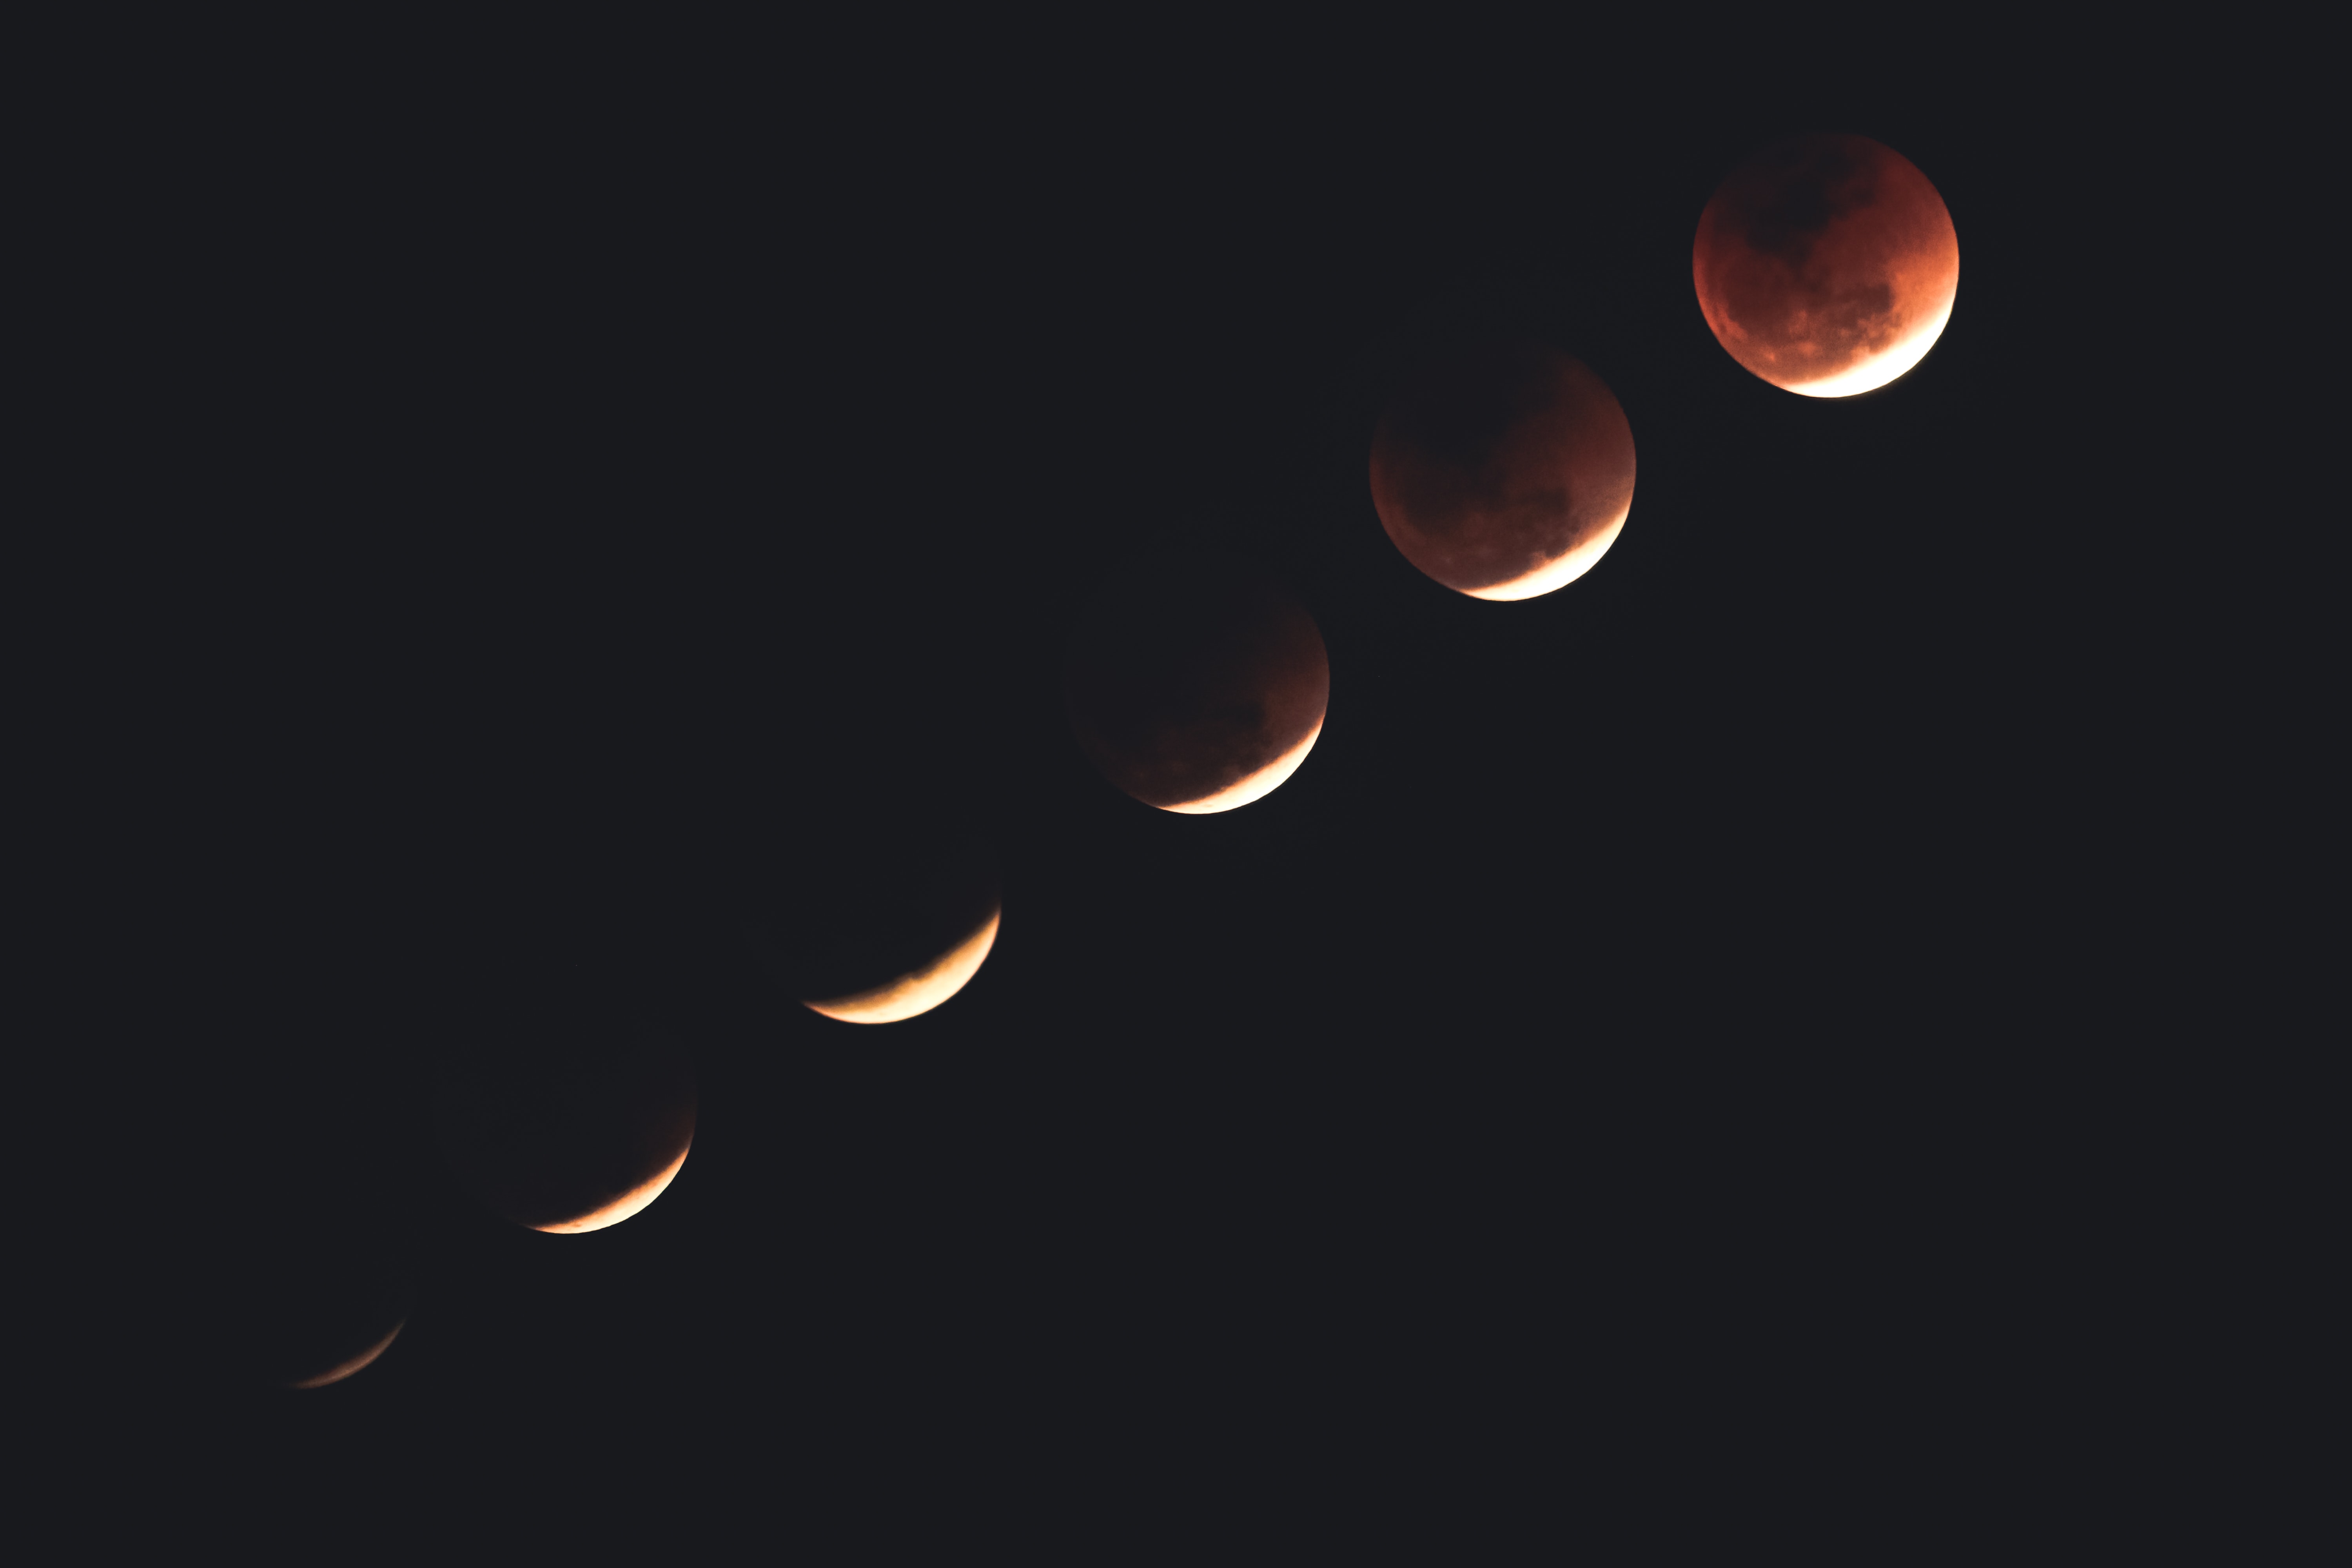 Phases of an eclipse